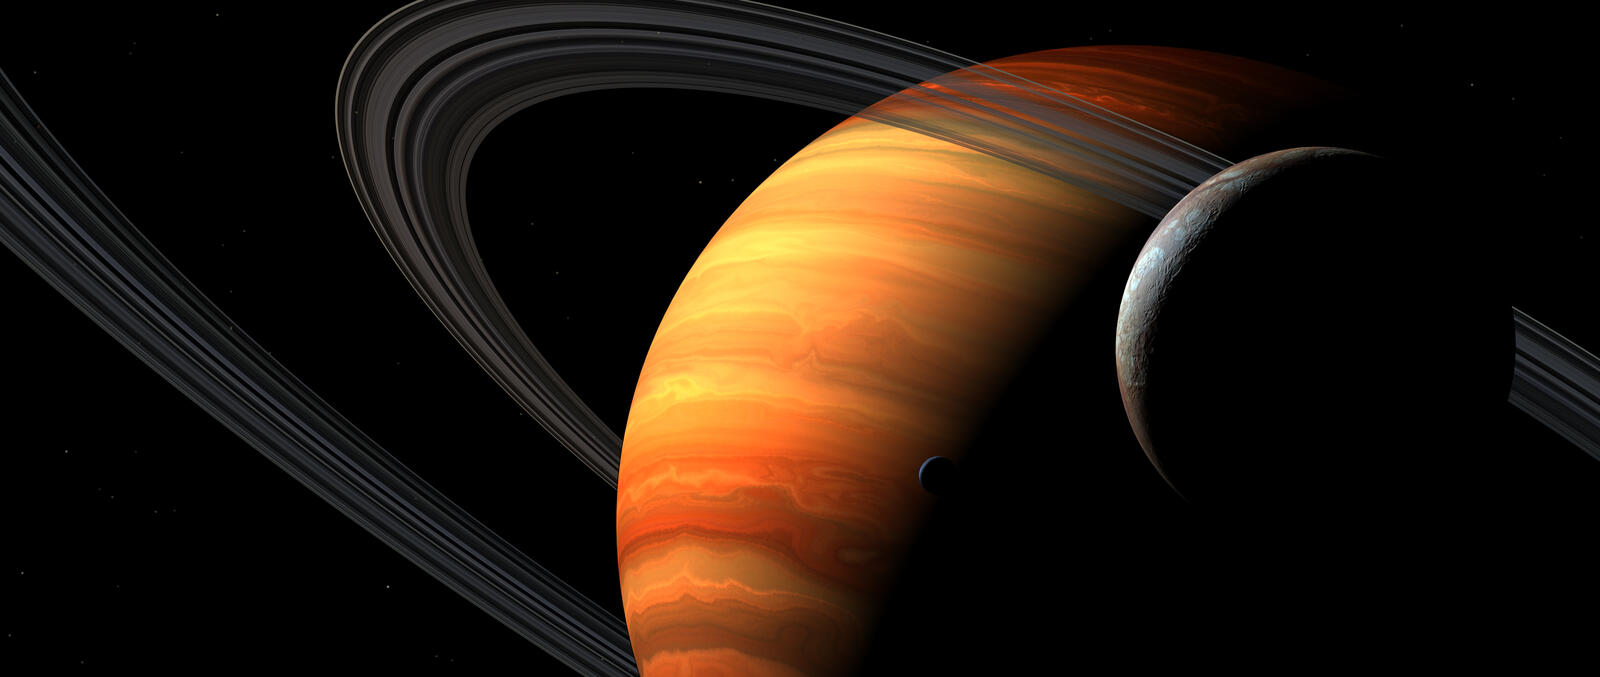 Wallpapers space planets artist on the desktop